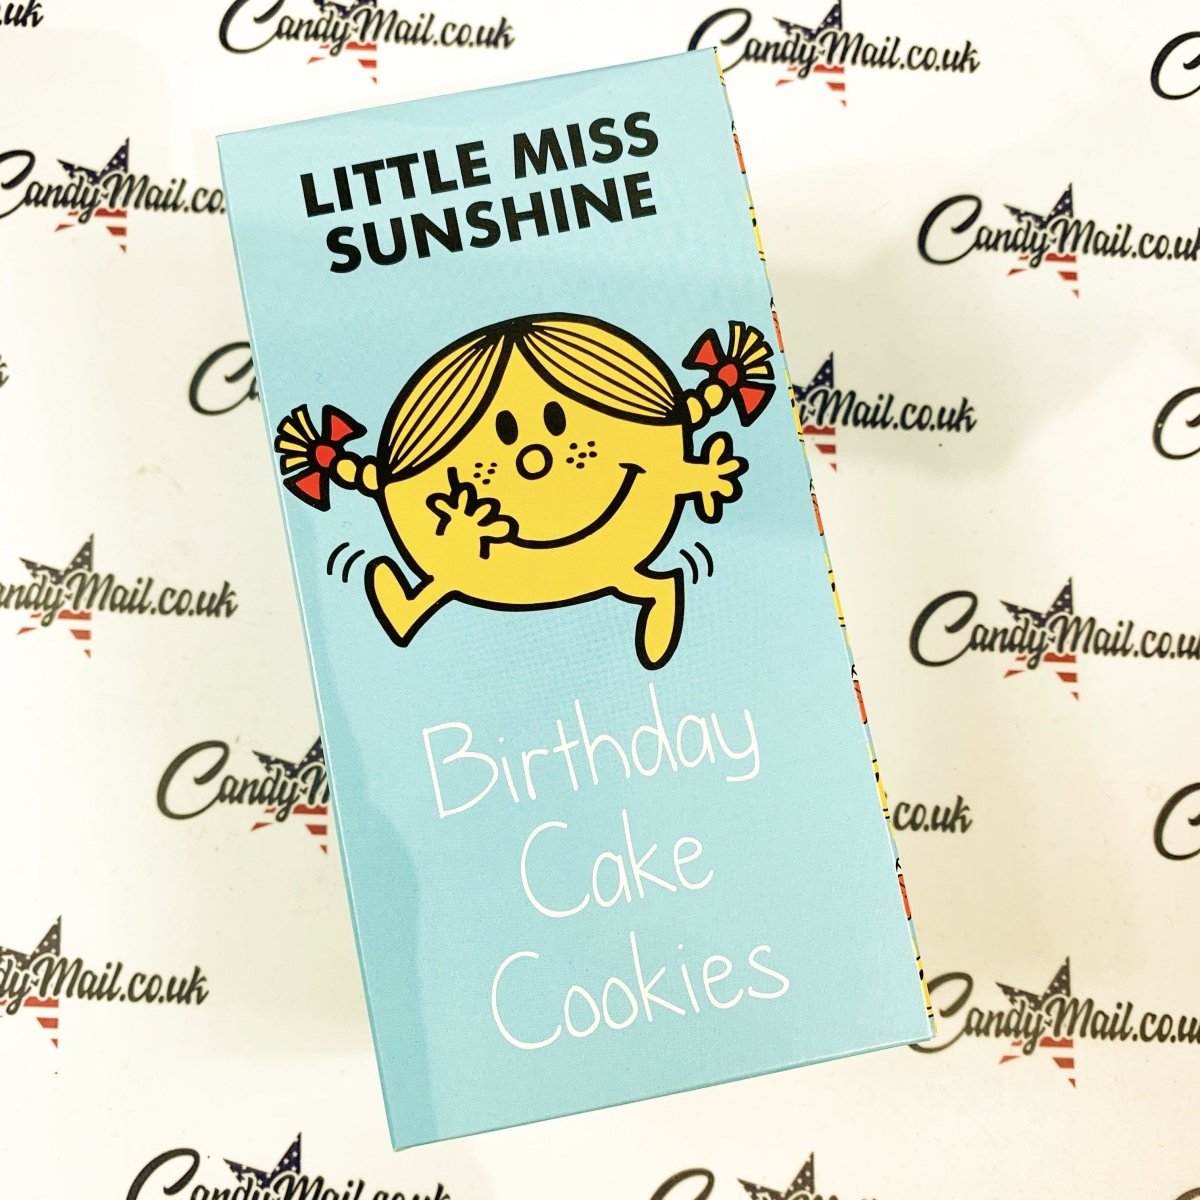 Little Miss Sunshine Birthday Cake Cookies 150g - Candy Mail UK